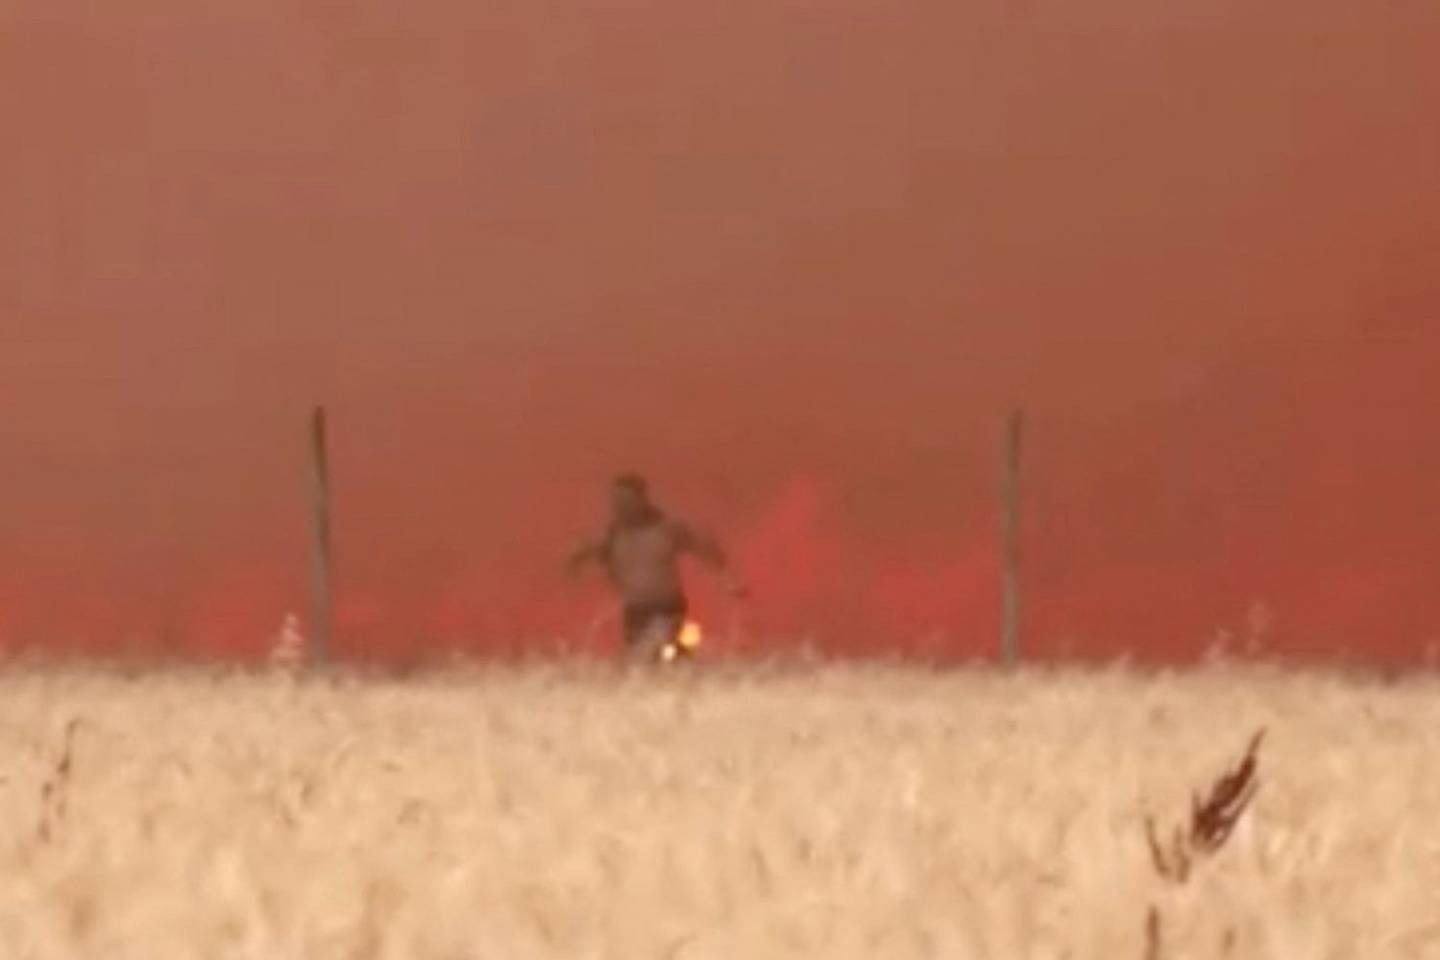 Spanish man dramatically escapes wildfire with clothes ablaze